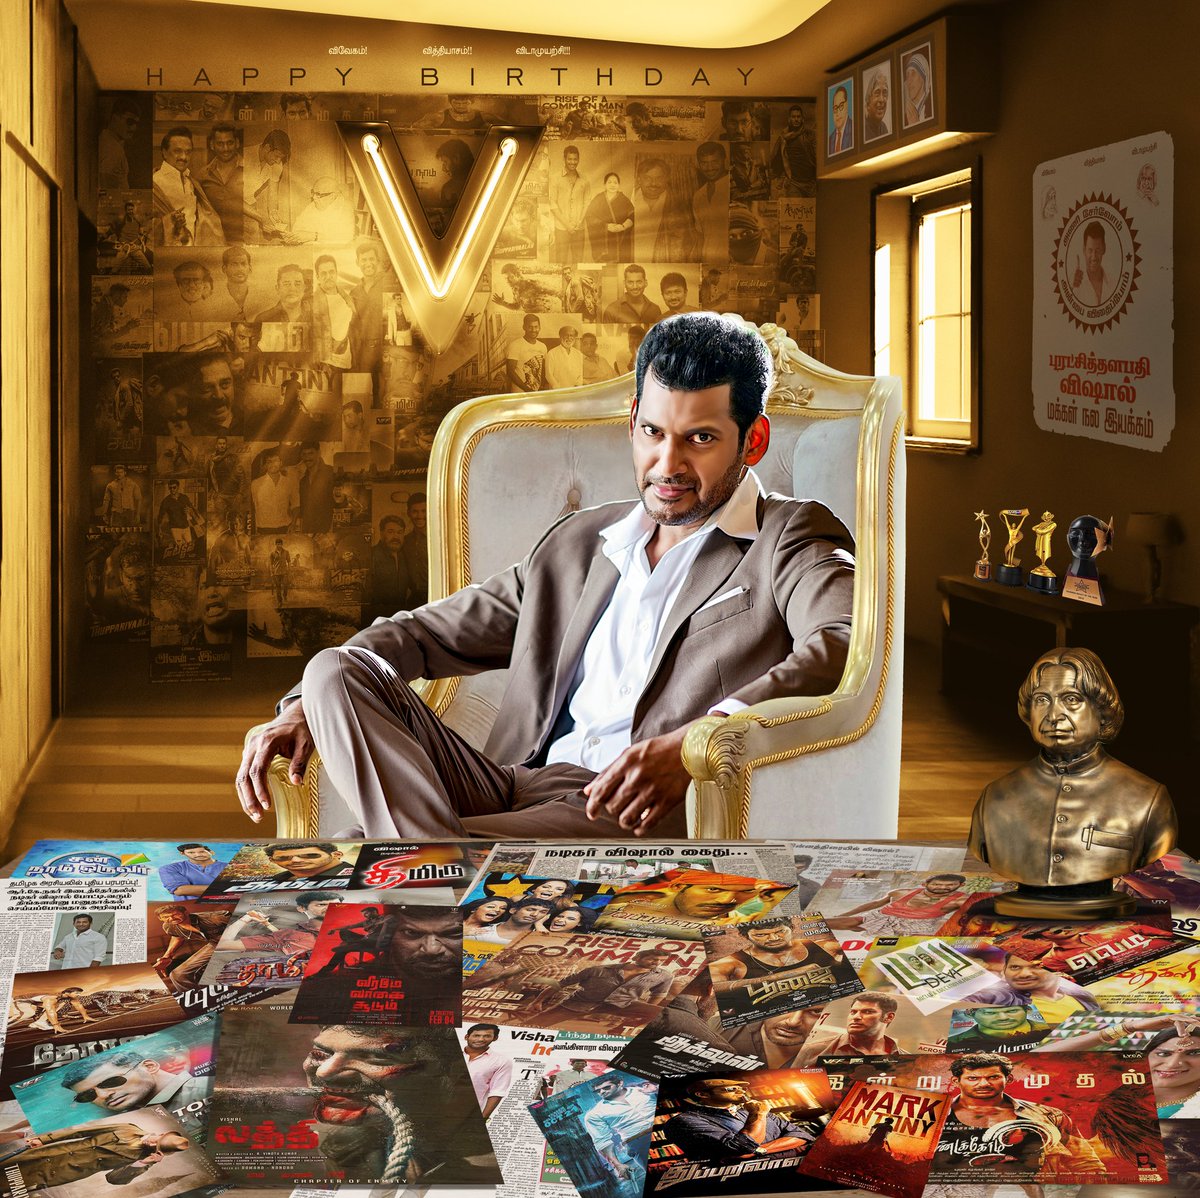 Very happy to unveil the Common DP to celebrate my beloved friend @VishalKOfficial’s birthday on #Aug29. Wishing you only the best and the happiest moments ahead in your journey. #HBDVishal #VishalBirthdayCDP #WelfareDay #HappyBirthdayVishal @HariKr_official @VISHAL_SFC